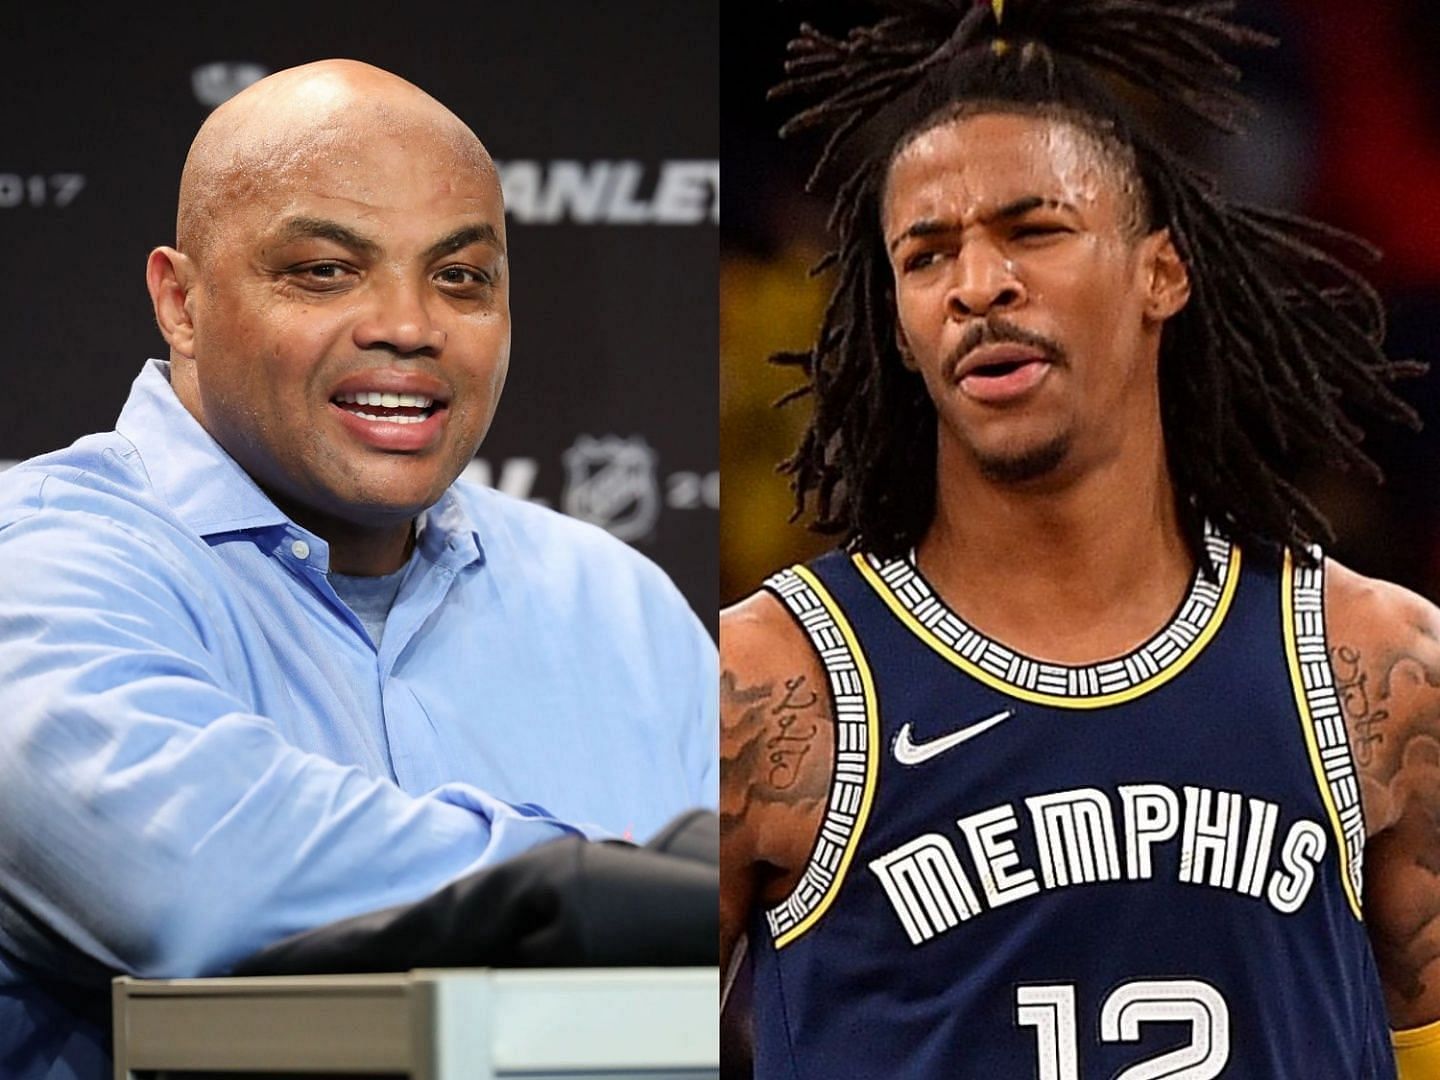 Charles Barkley thinks Ja Morant is not the most invaluable player for the Memphis Grizzlies.